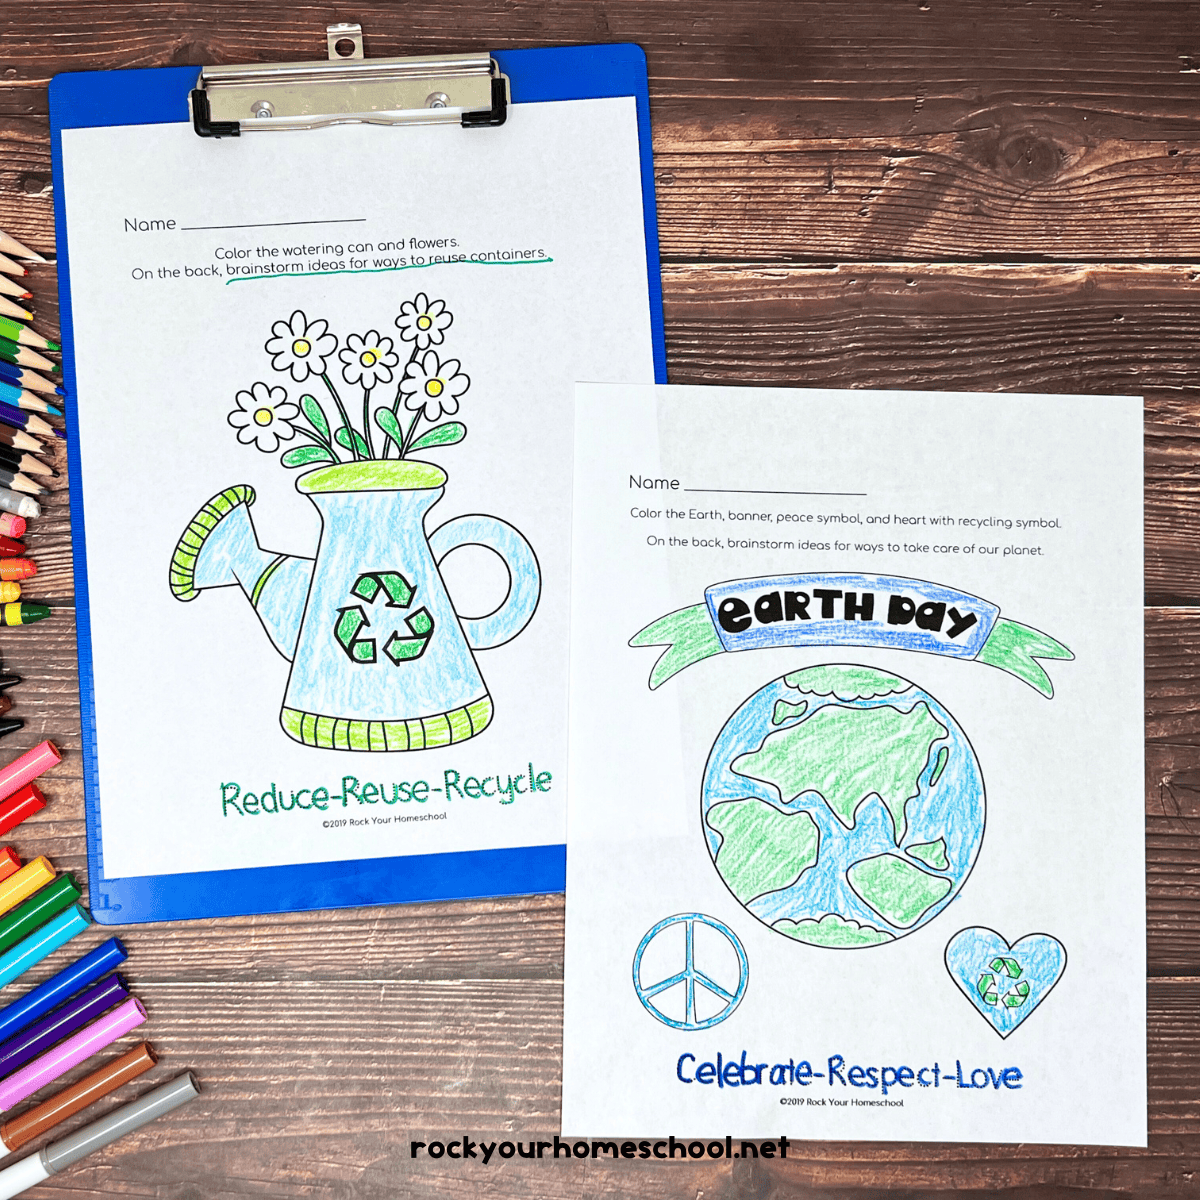 Two examples of Earth Day coloring pages.